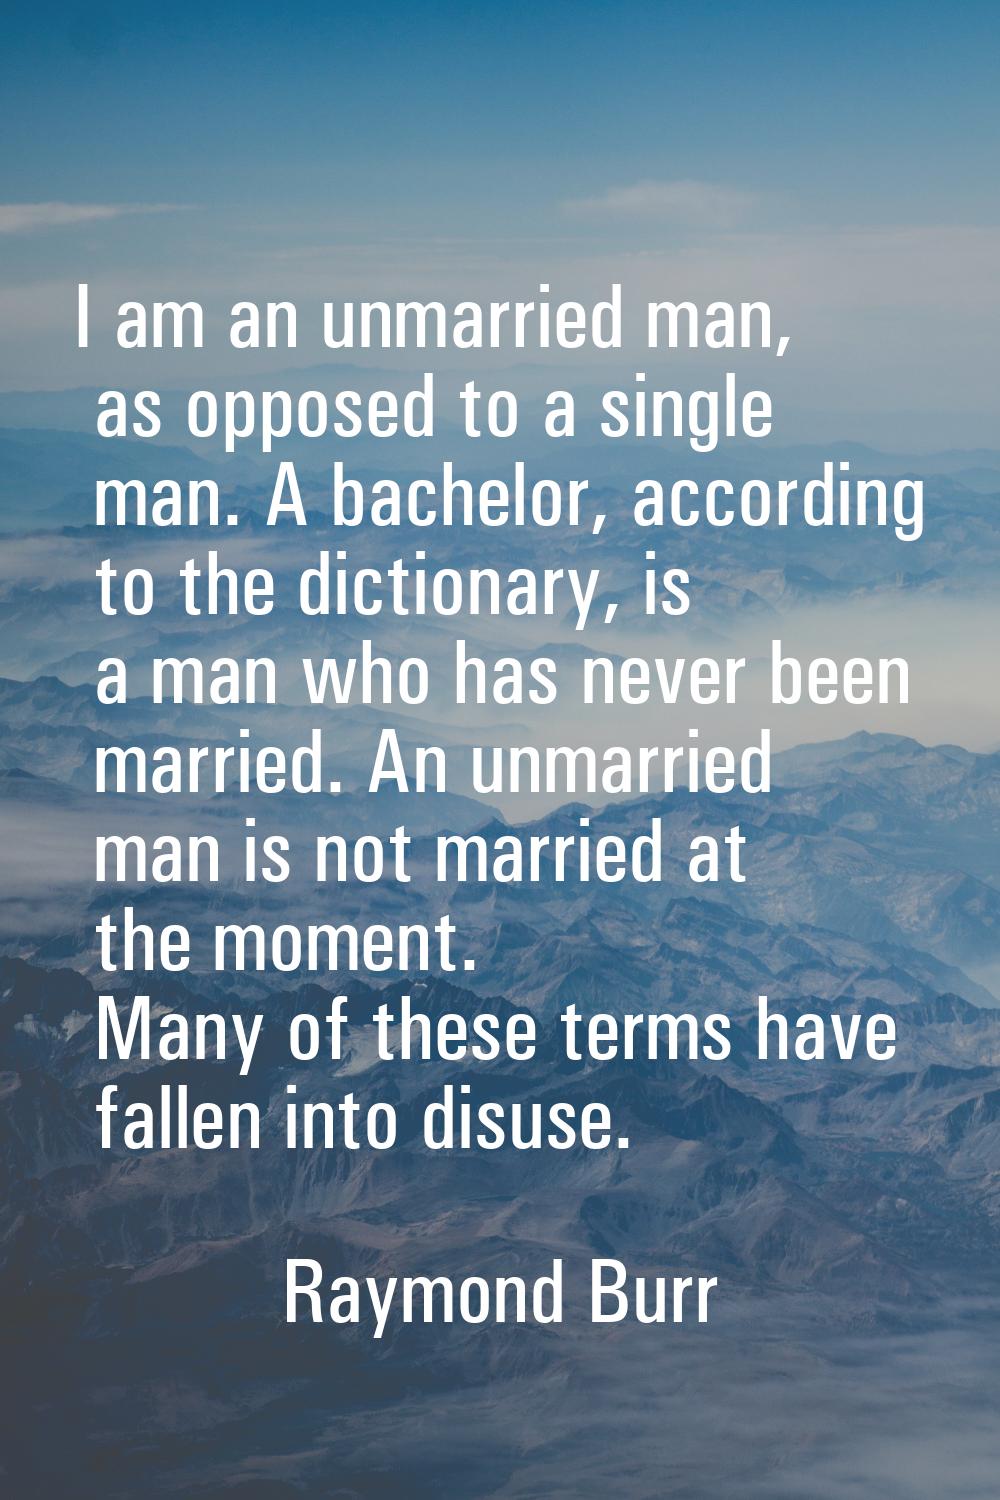 I am an unmarried man, as opposed to a single man. A bachelor, according to the dictionary, is a ma